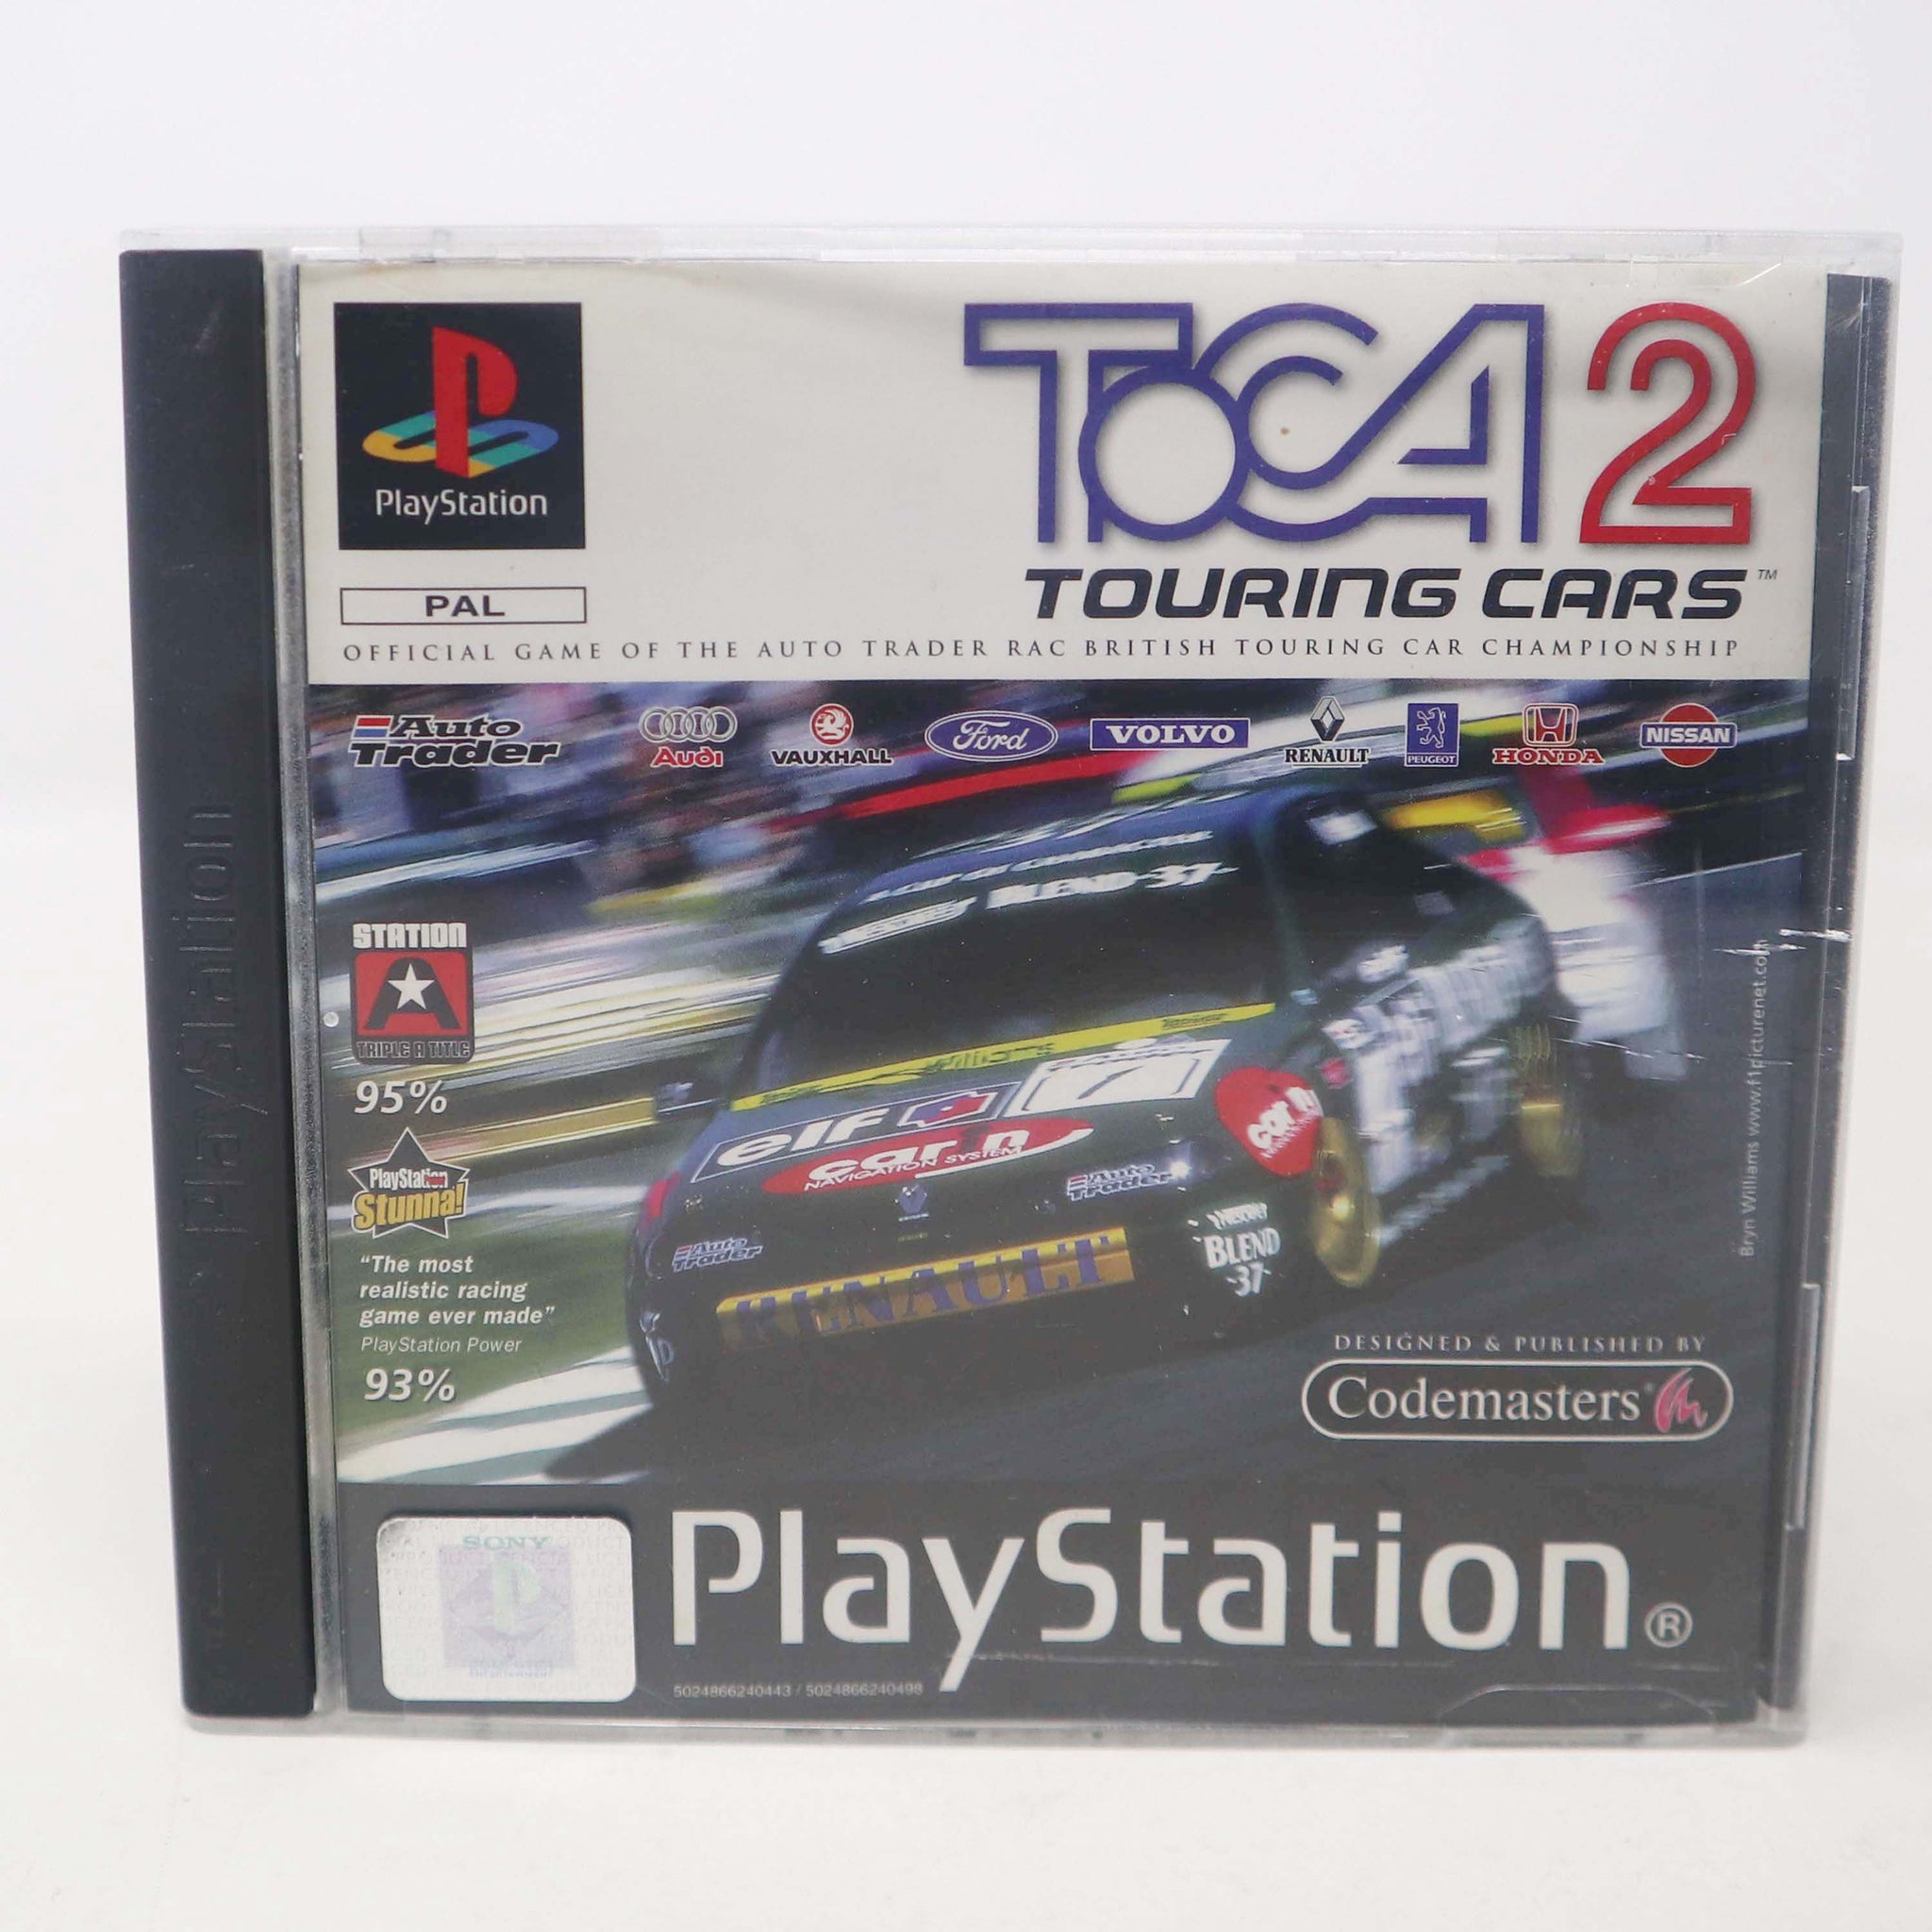 Vintage 1998 90s Playstation 1 PS1 TOCA 2 Touring Cars Video Game Pal 1-2 Players Car Racing